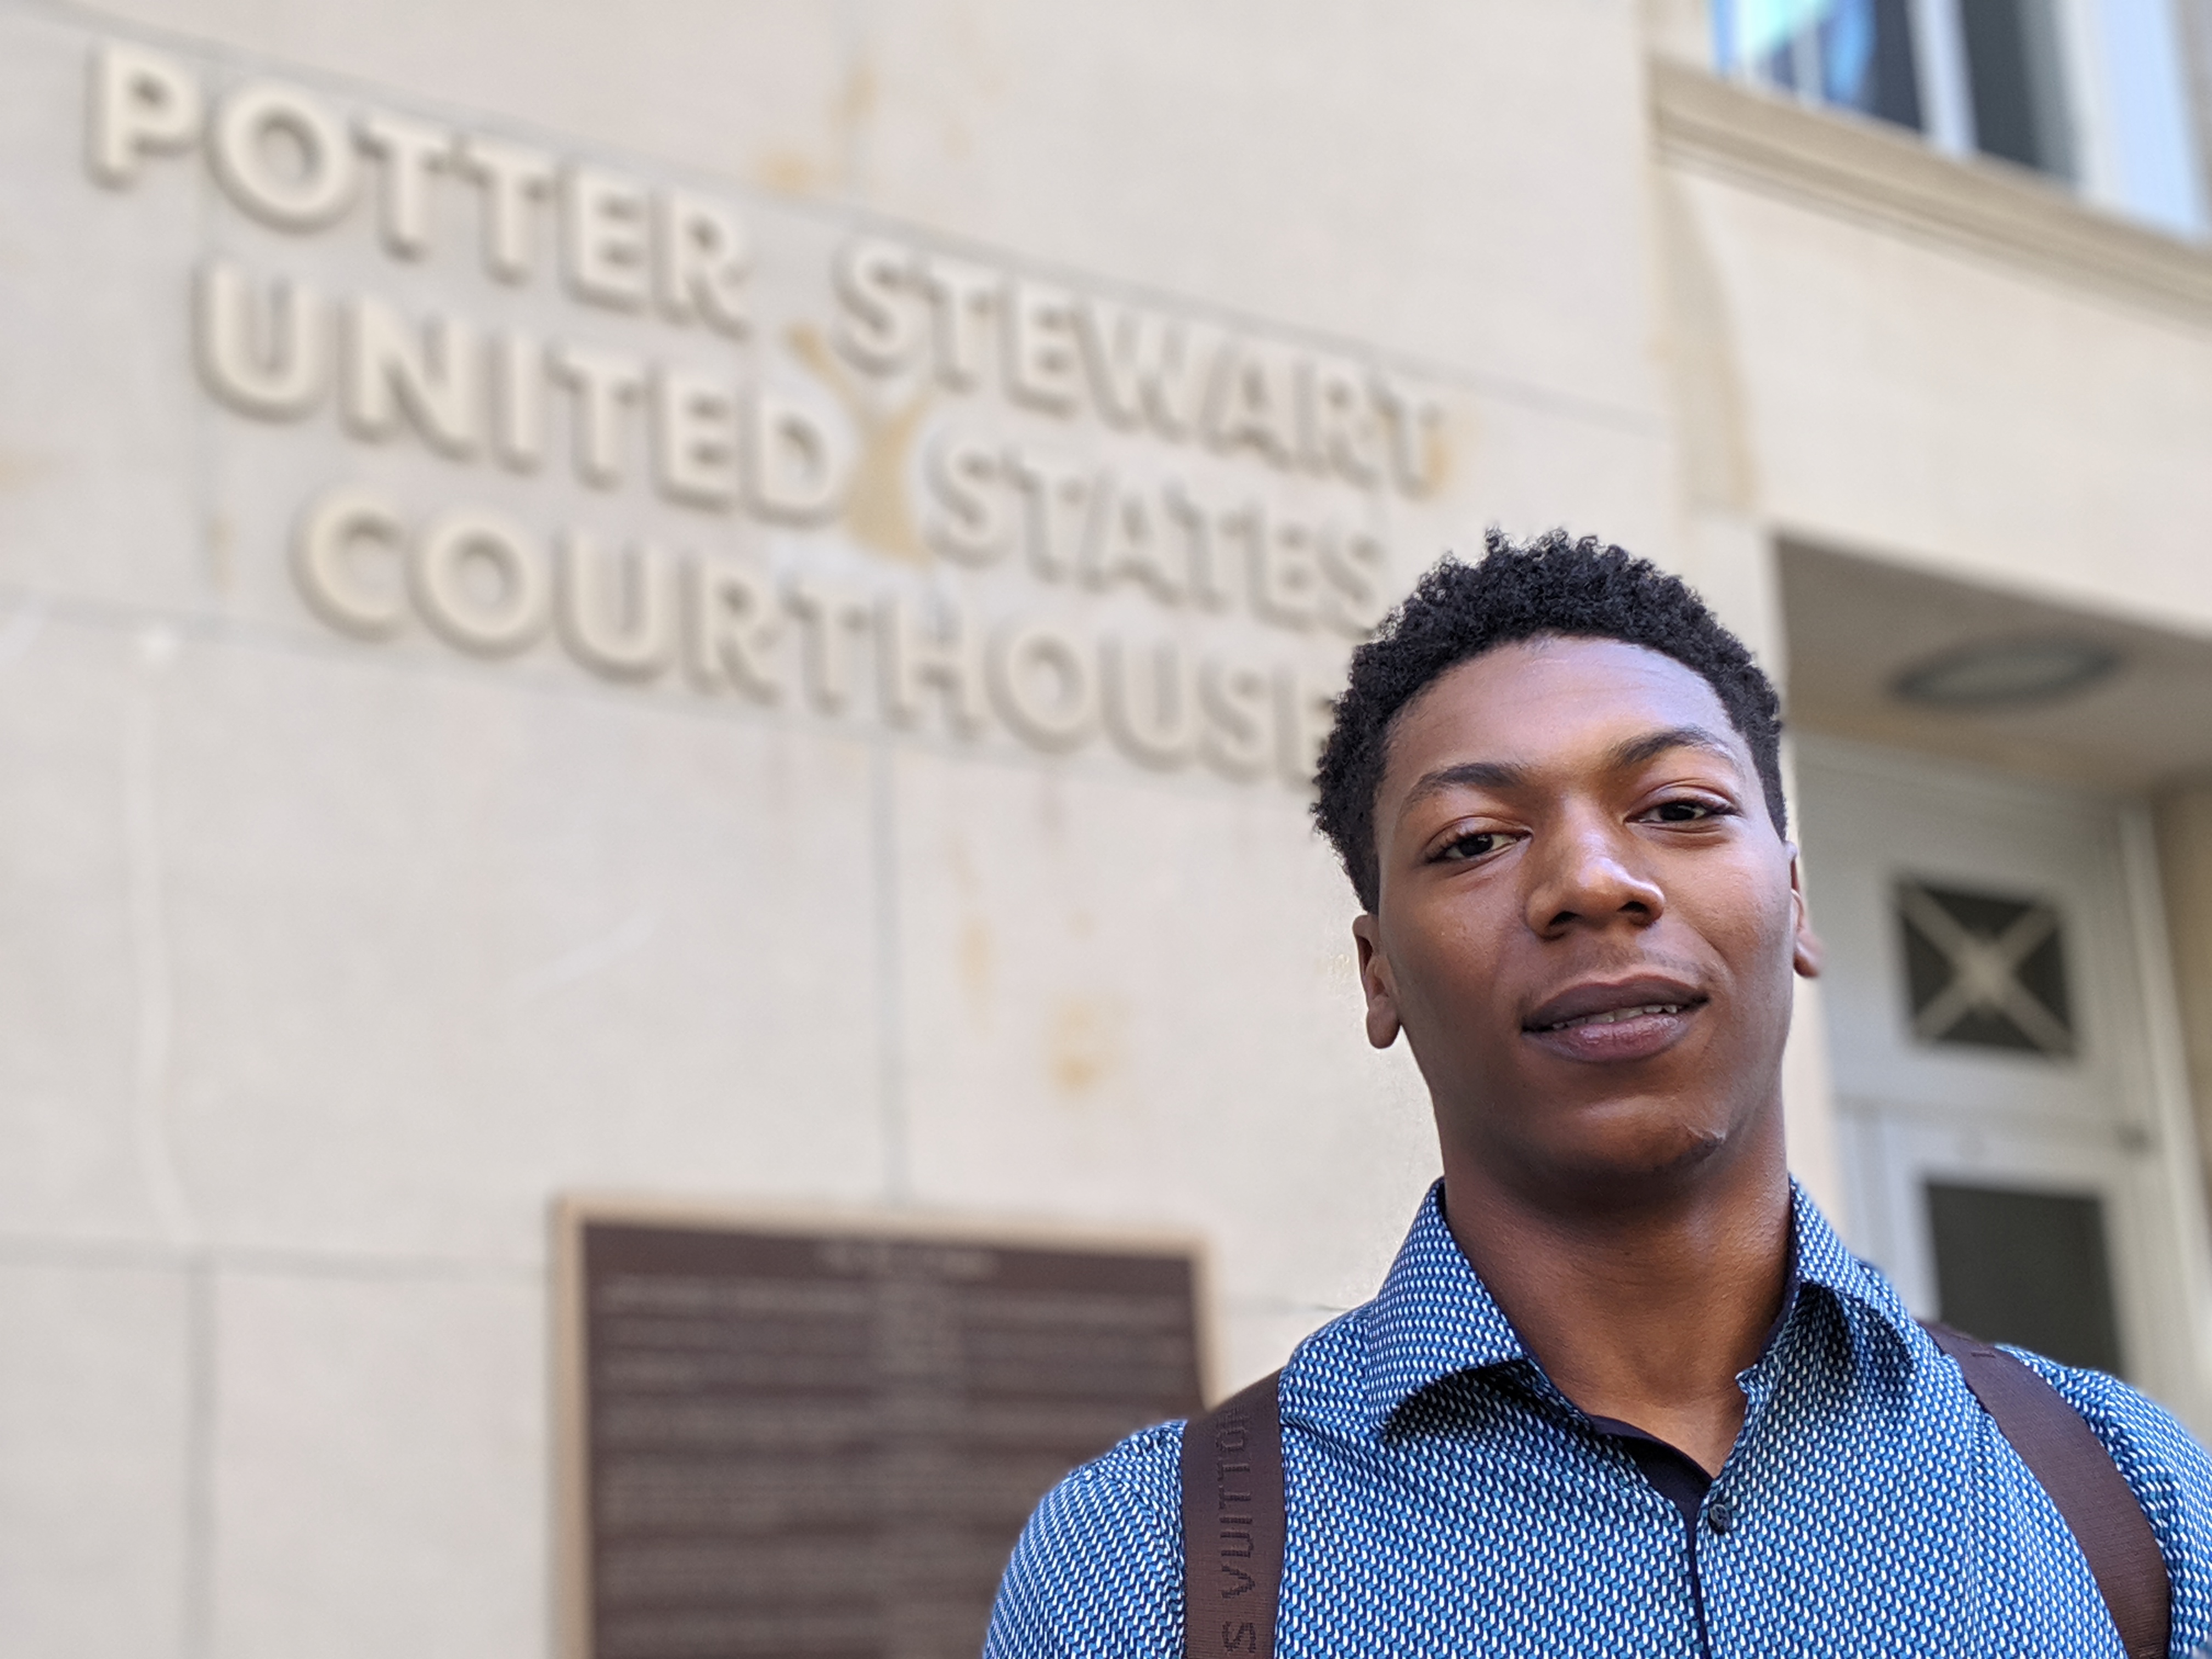 Jamarria Hall had to take remedial classes in college despite finishing near the top of his class at Osborn High School in Detroit. He was one of the plaintiffs in the landmark literacy case. (Bridge photo by Mike Wilkinson)